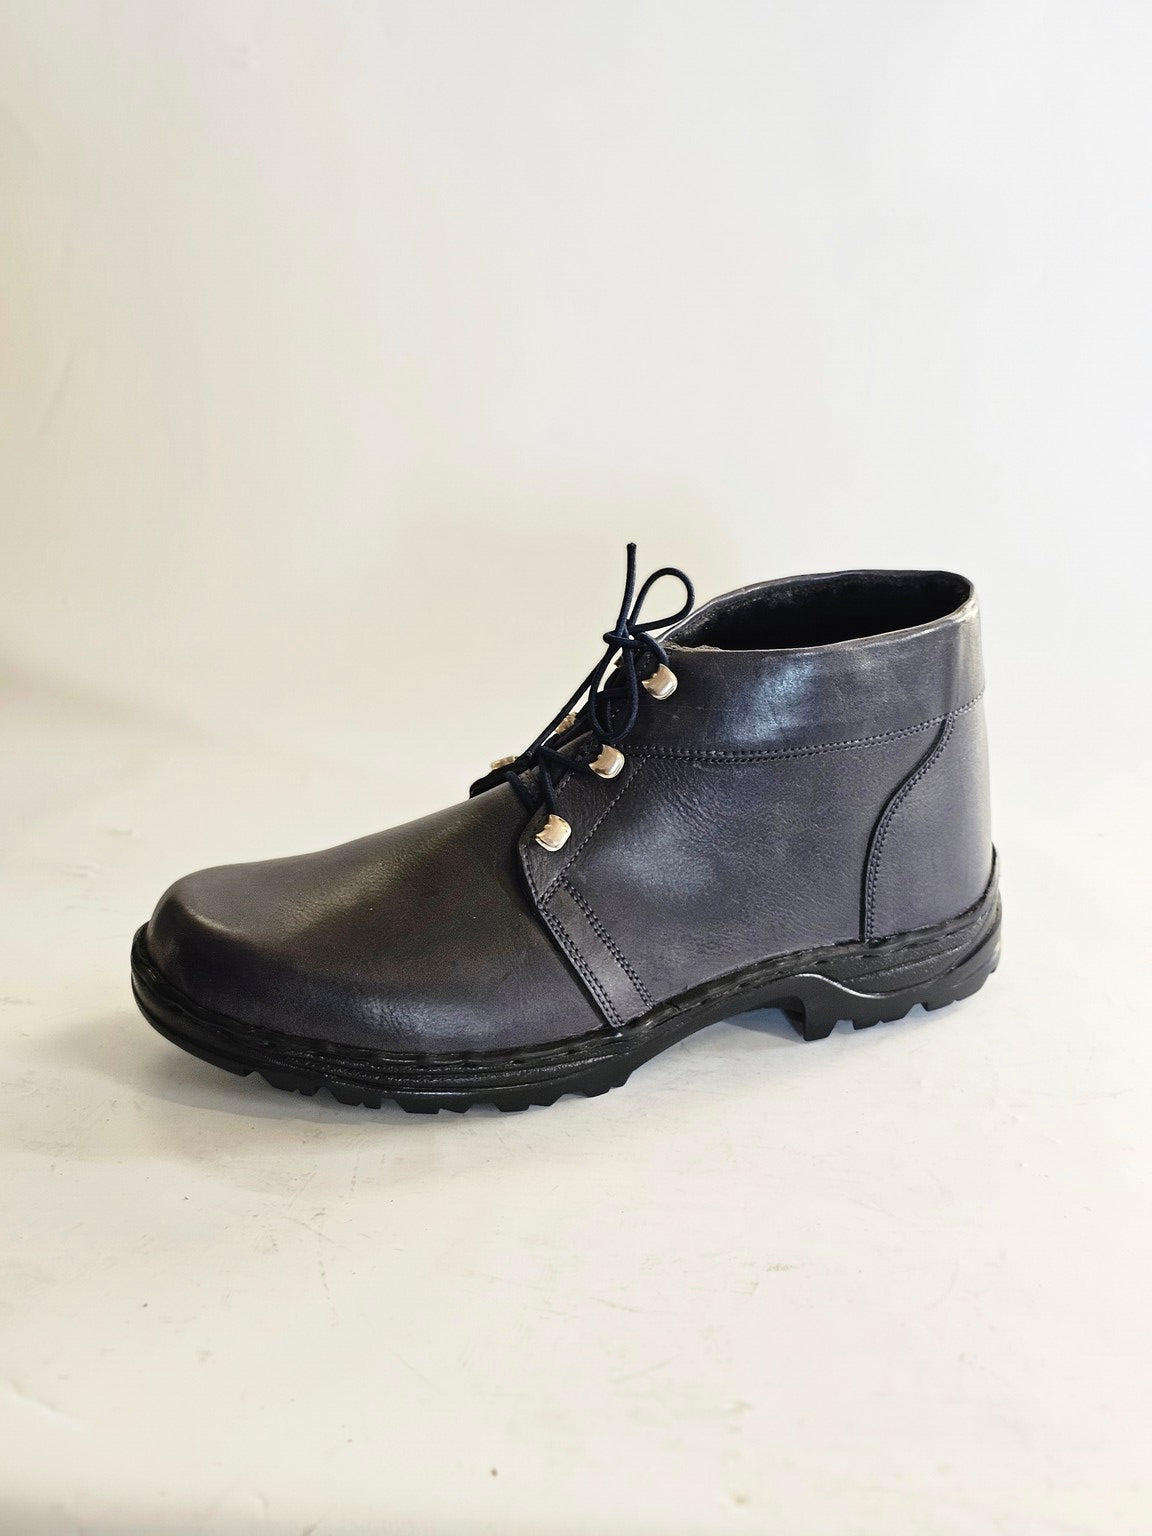 Monti Work Boot - Hello Quality Collection